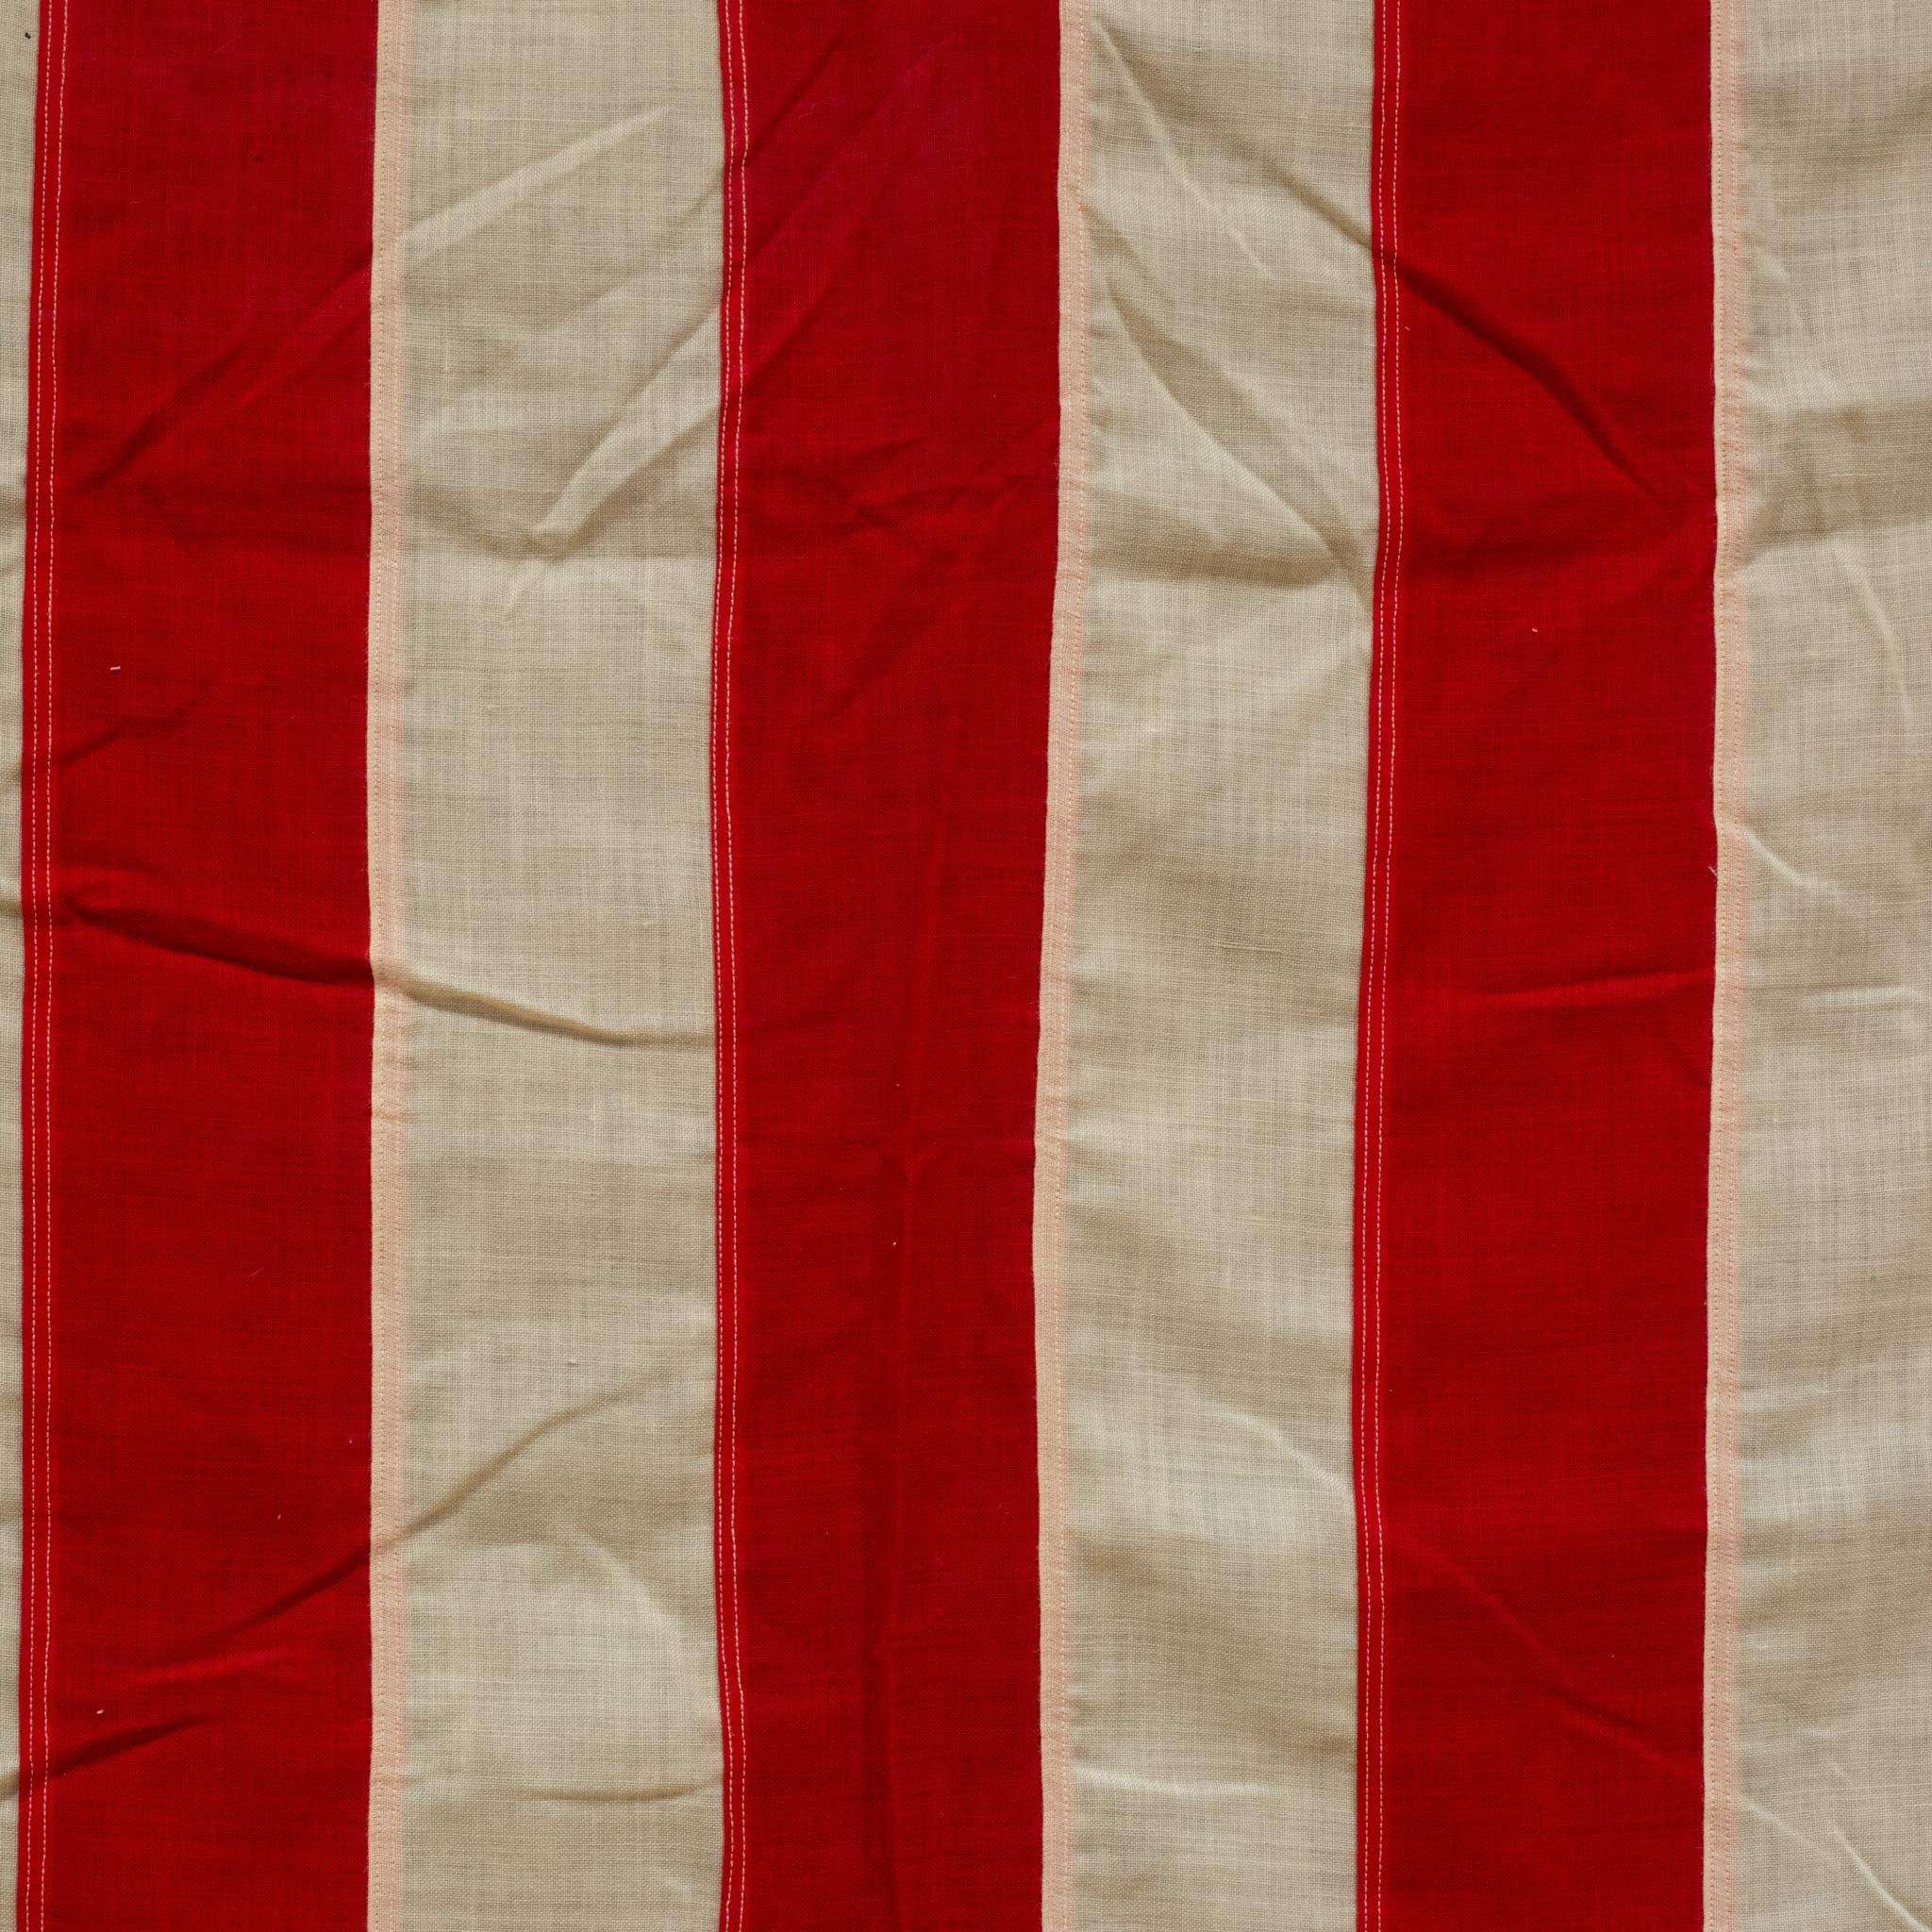 Industrial Large Vintage Wool American Flag with 48 Stars c.1940-1950-FREE SHIPPING